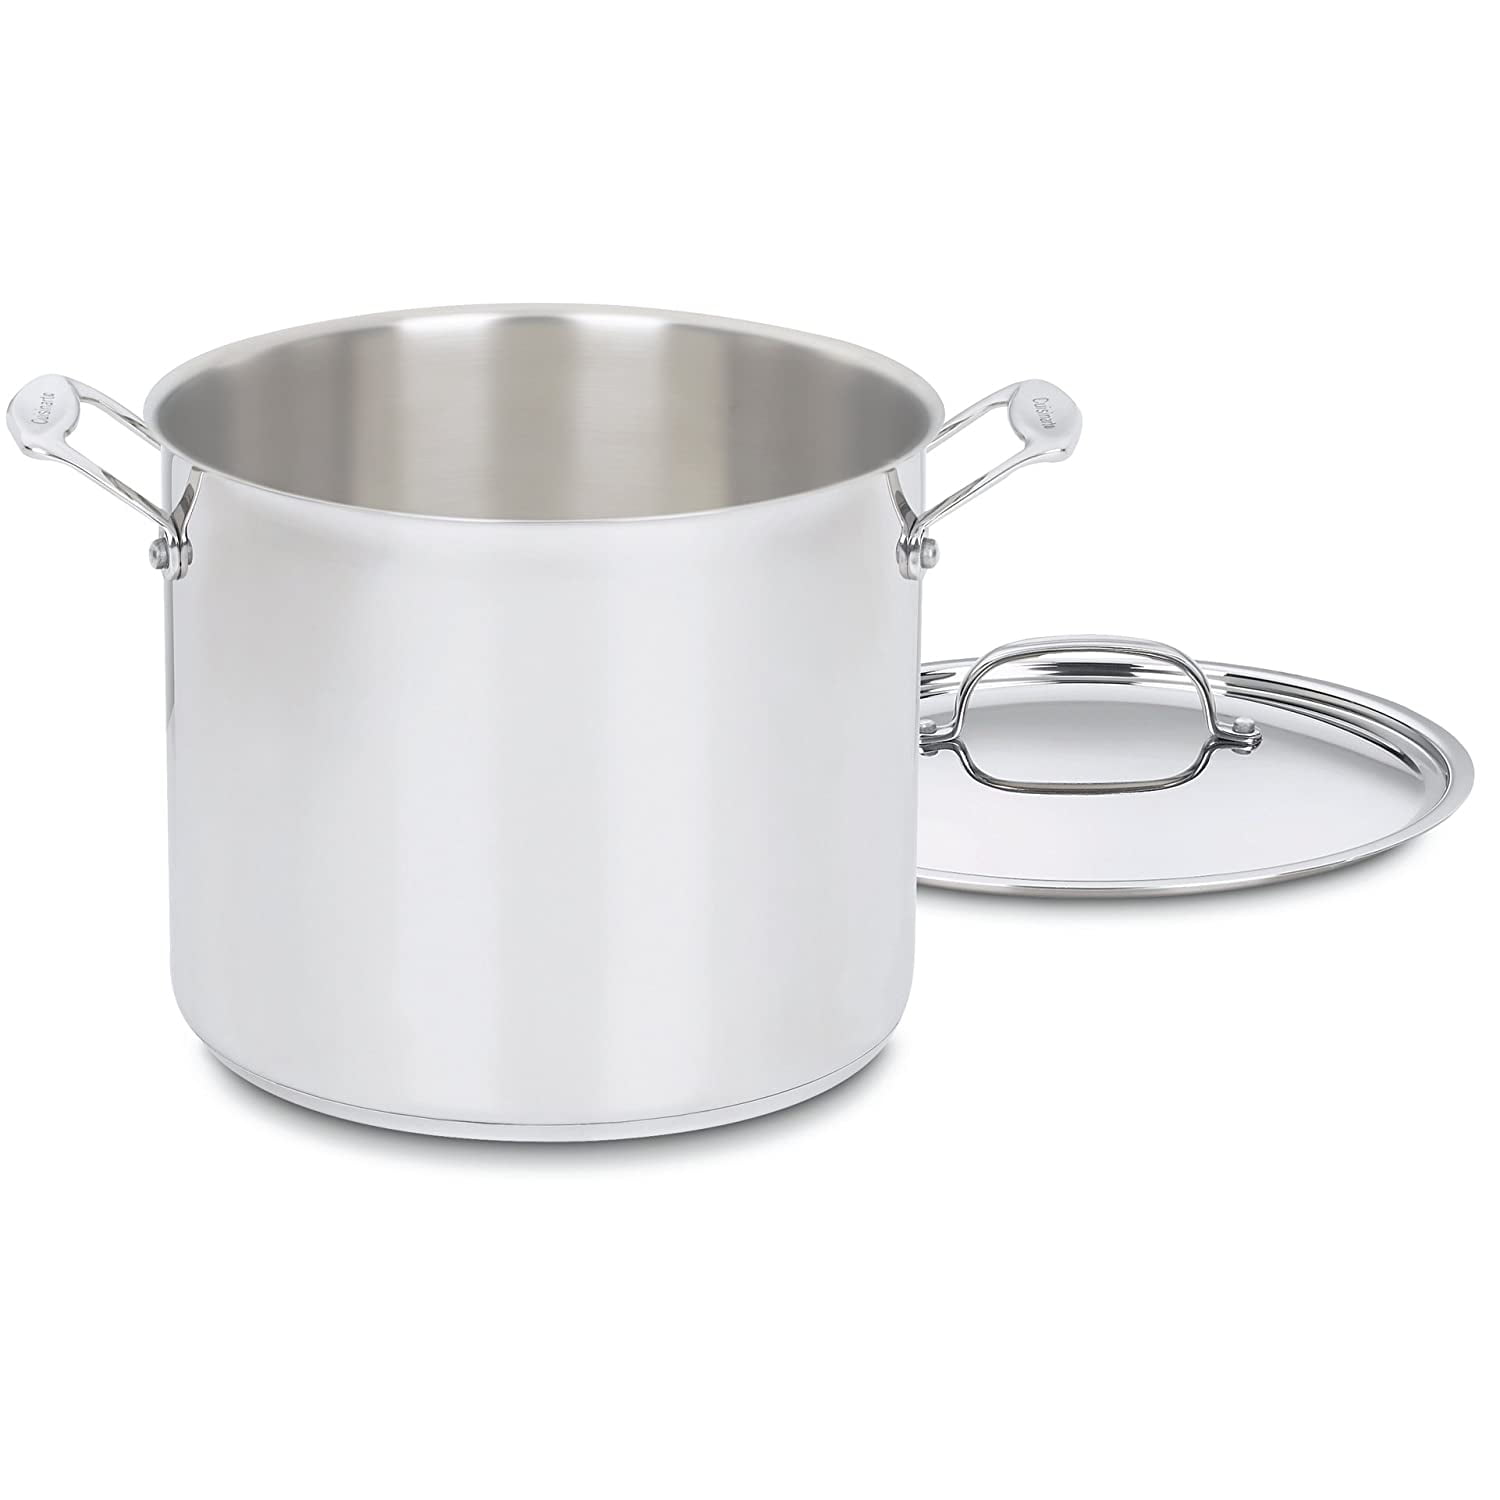 Mainstays 12 Quart Stock Pot With Lid Stainless Steel for sale online 